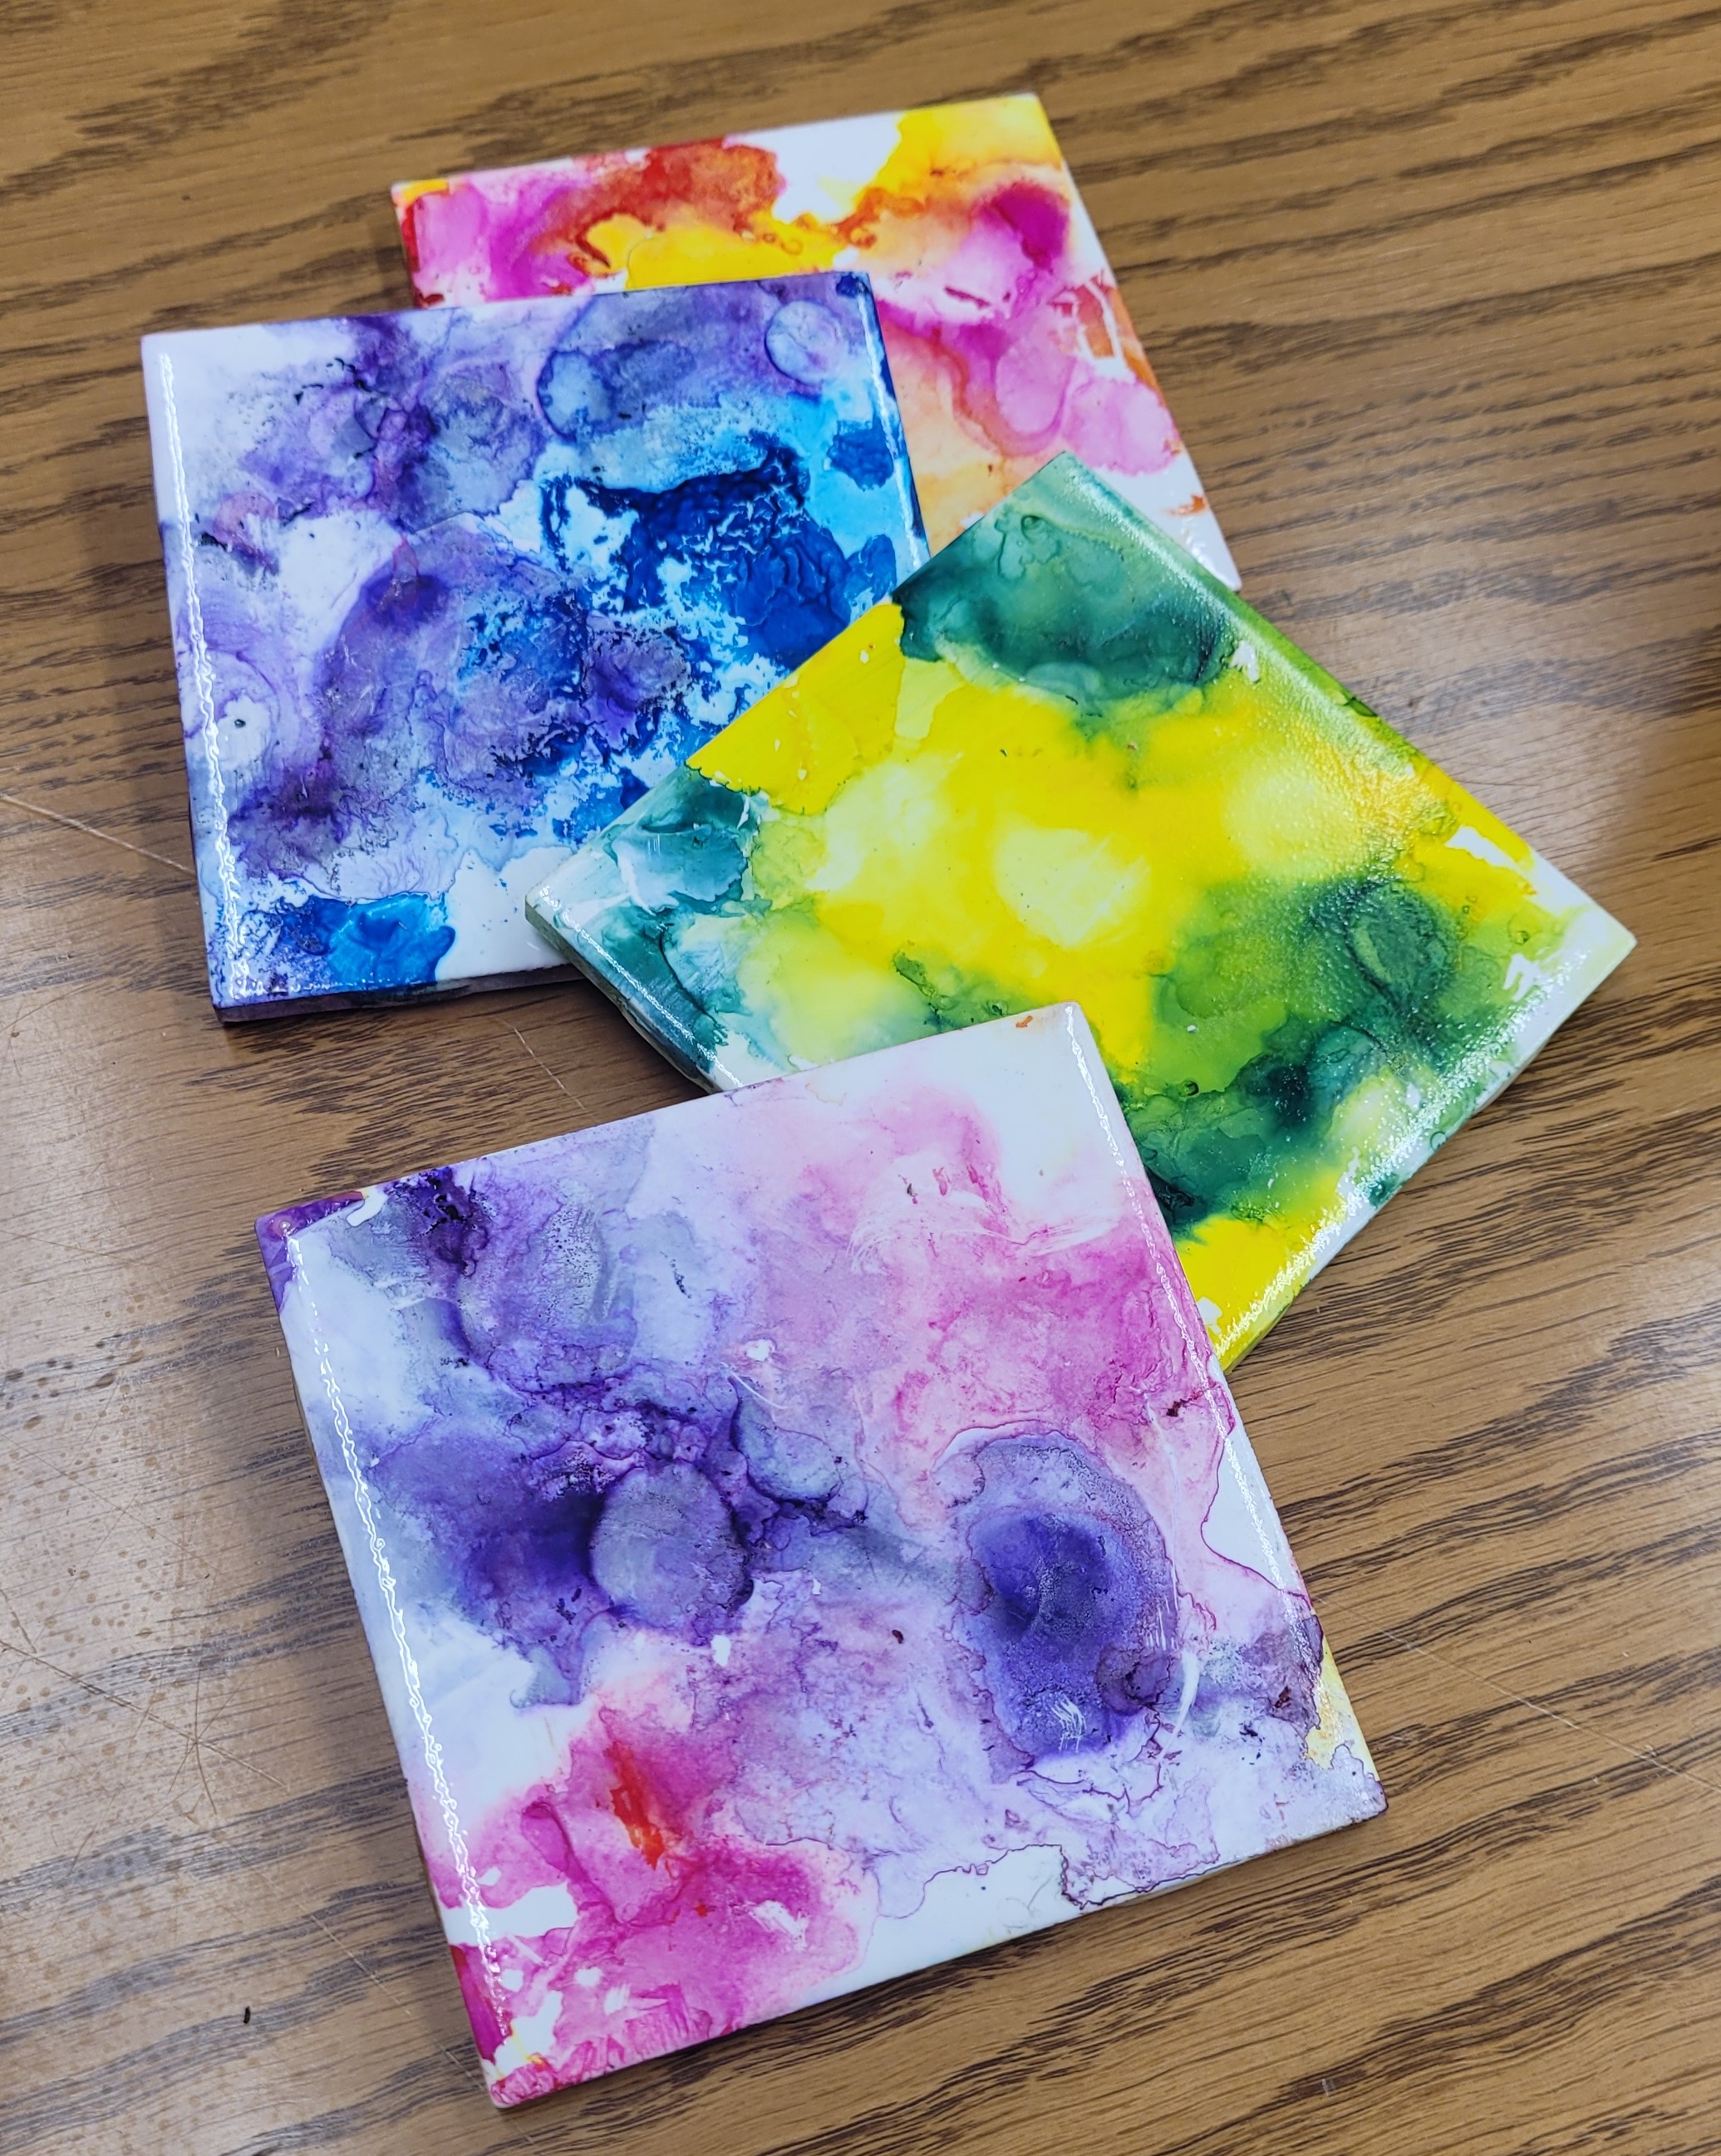 4 tile coasters with tie dye patterns on them